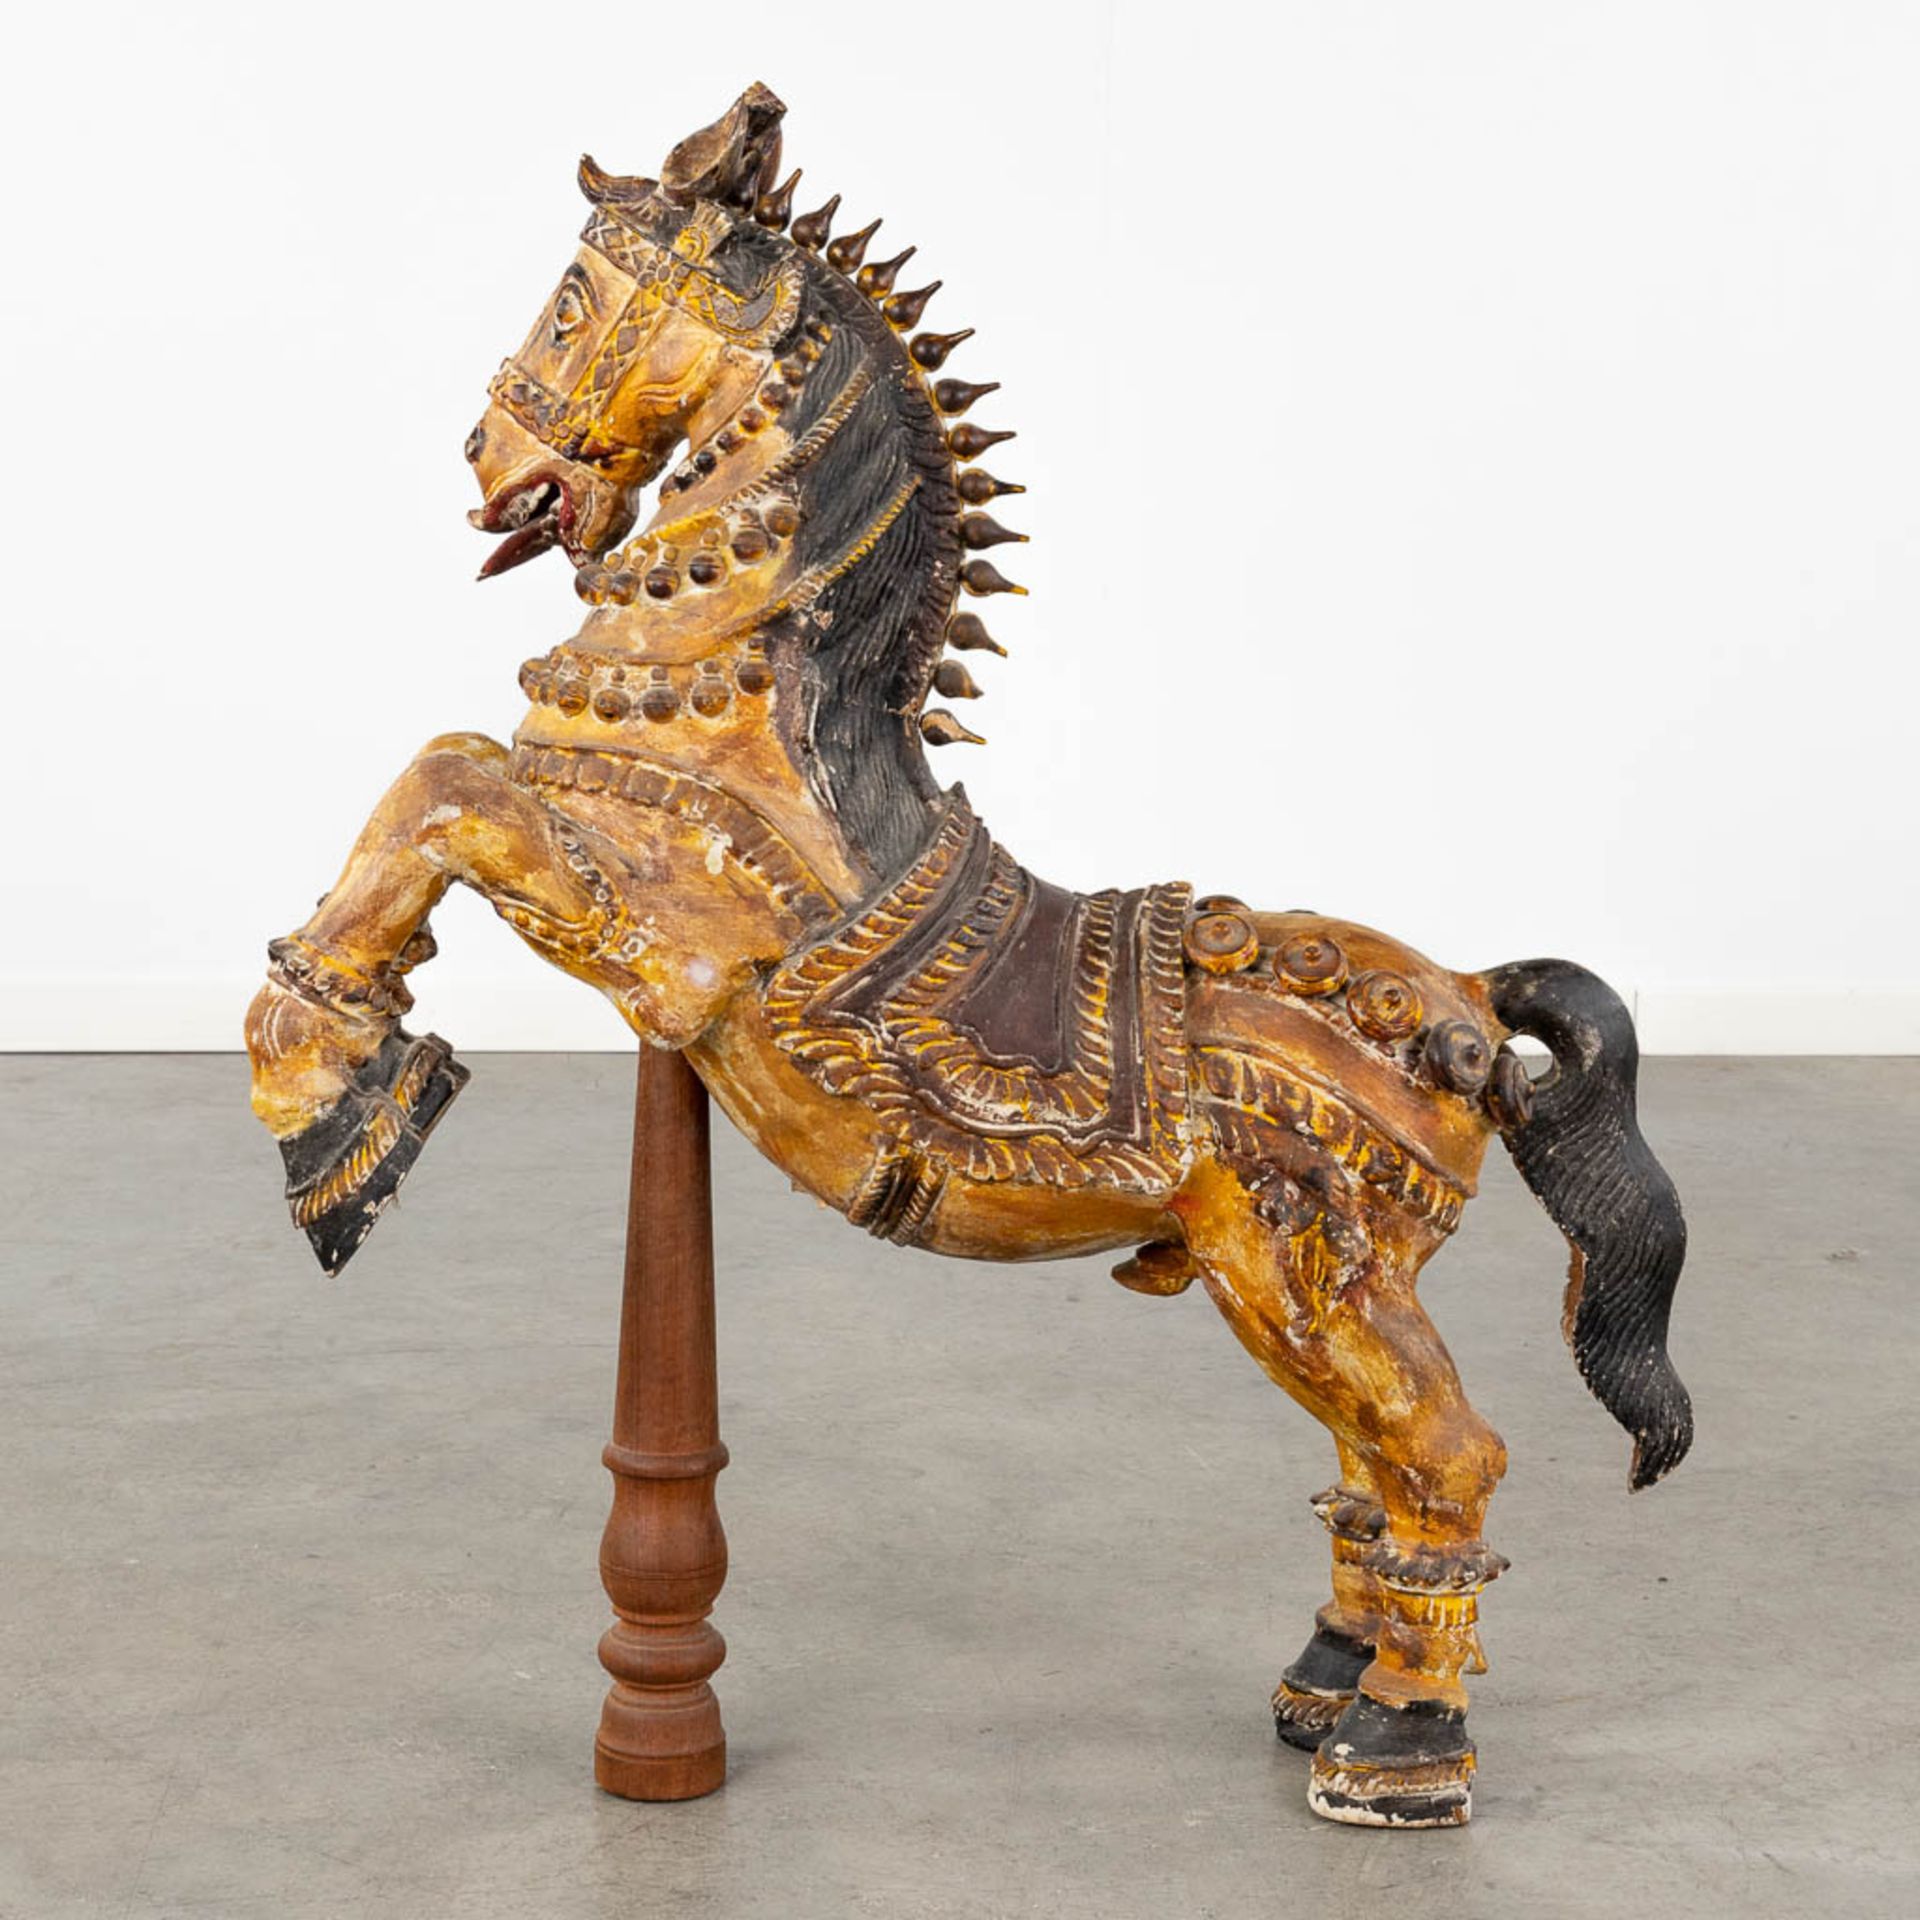 An antique wood sculptured figurine of a horse. (L:22 x W:66 x H:79 cm) - Image 5 of 16